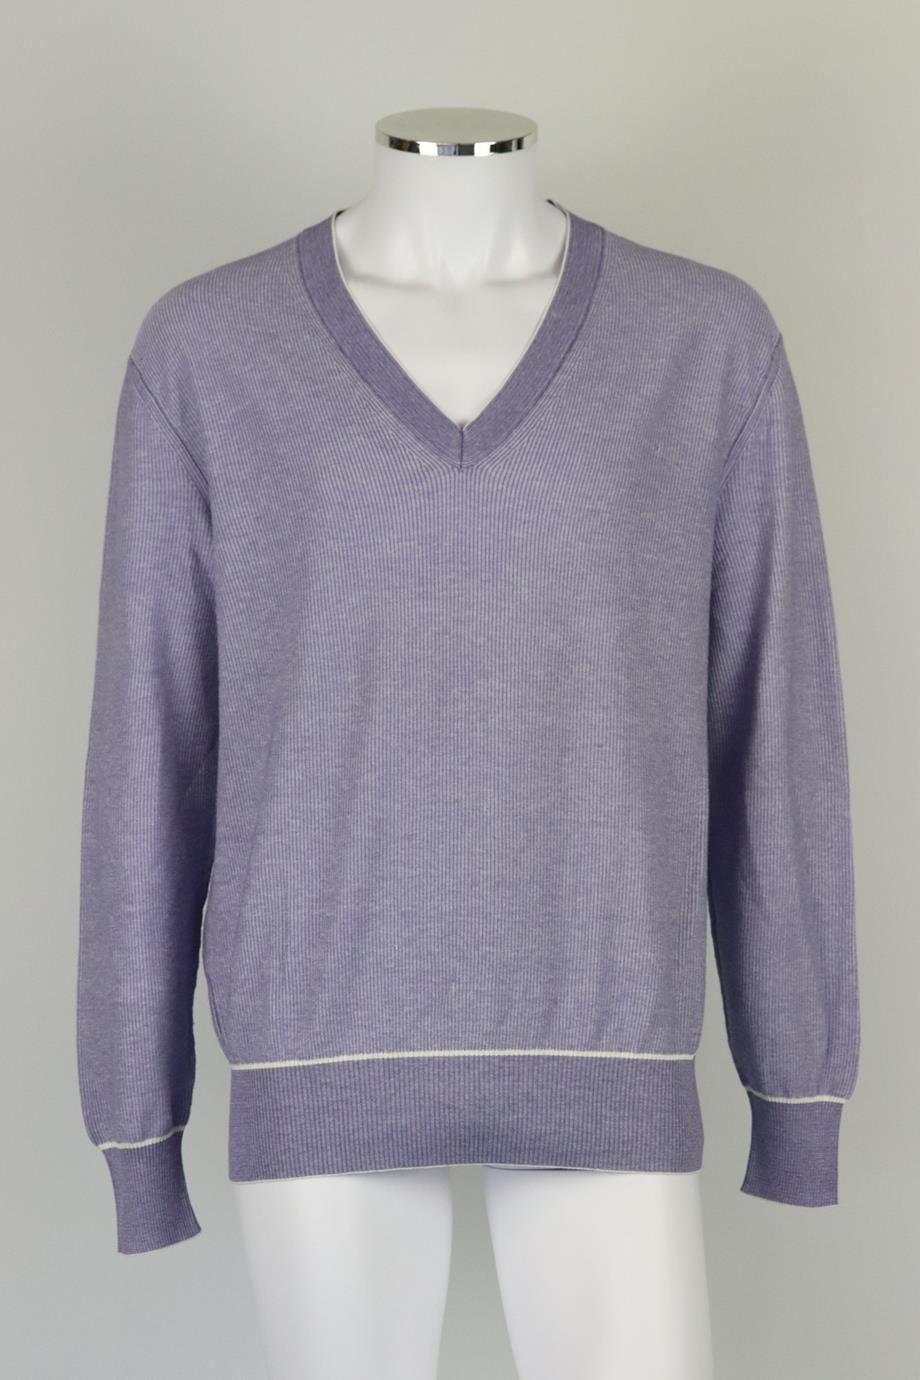 Tom Ford men's cotton and cashmere sweater. Purple and white. Long sleeve, v-neck. Slips on. 40% Cotton, 30% cashmere, 13% silk. Size: IT 52 (XLarge, UK/US Chest 42). Chest: 44 in. Waist: 44 in. Hips: 33 in. Length: 28 in. Very good condition - Some